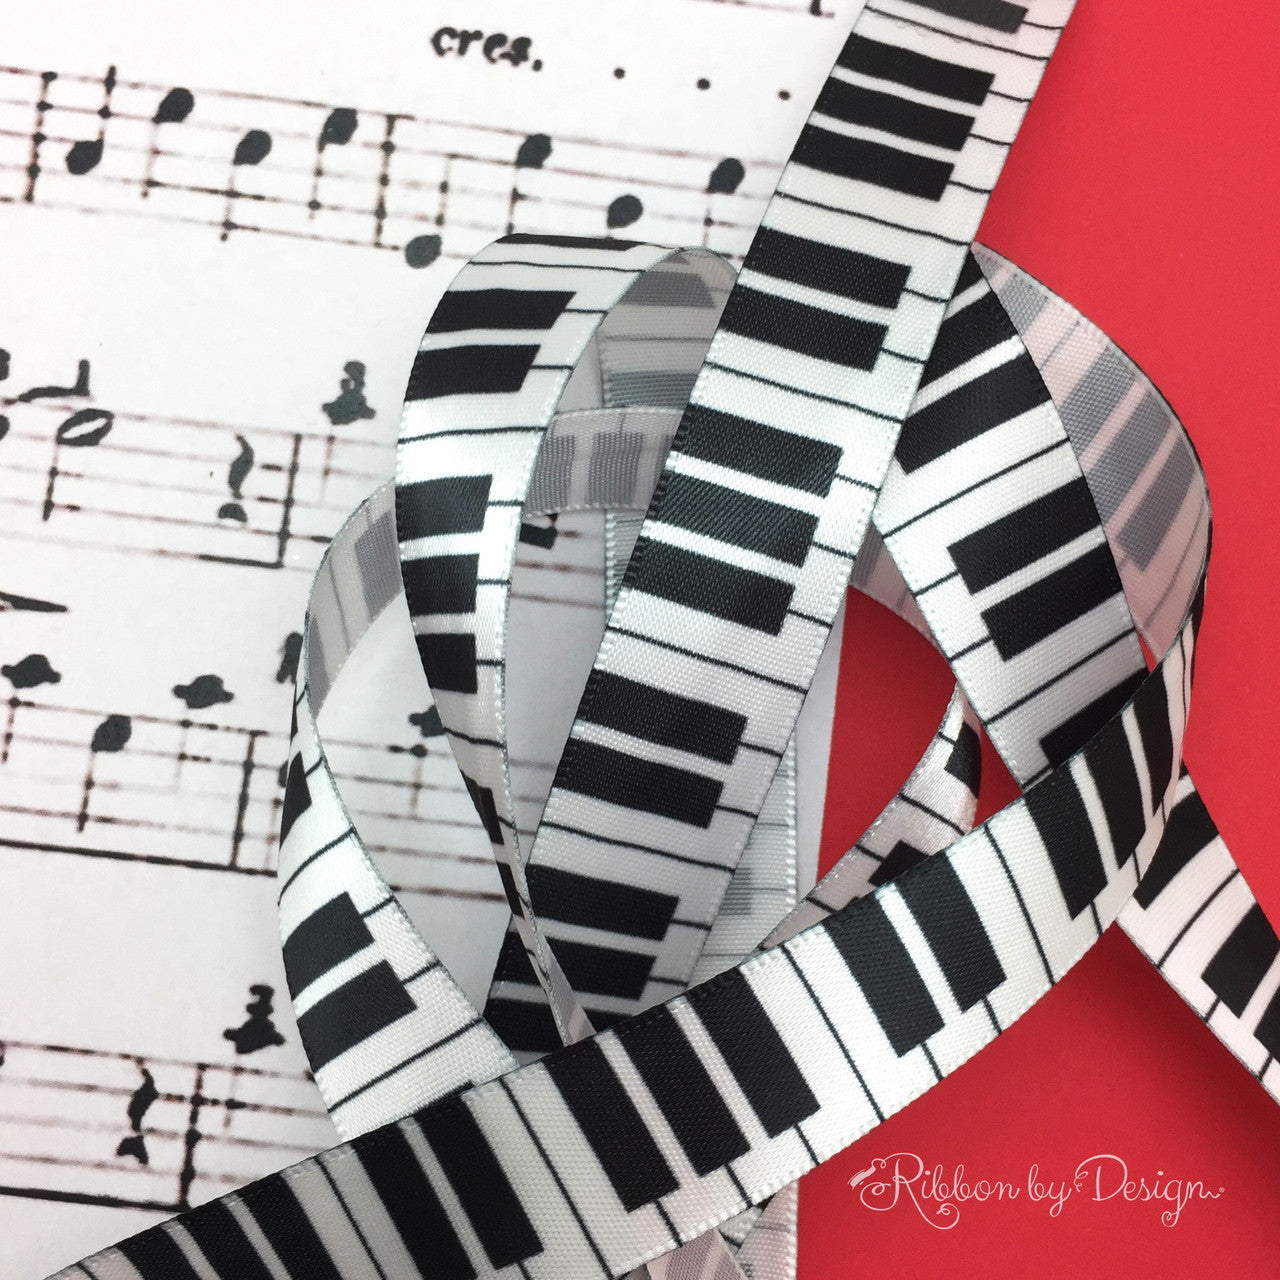 Our fun keyboard ribbon will make any music lover sing when this ribbon is on a gift or favor!